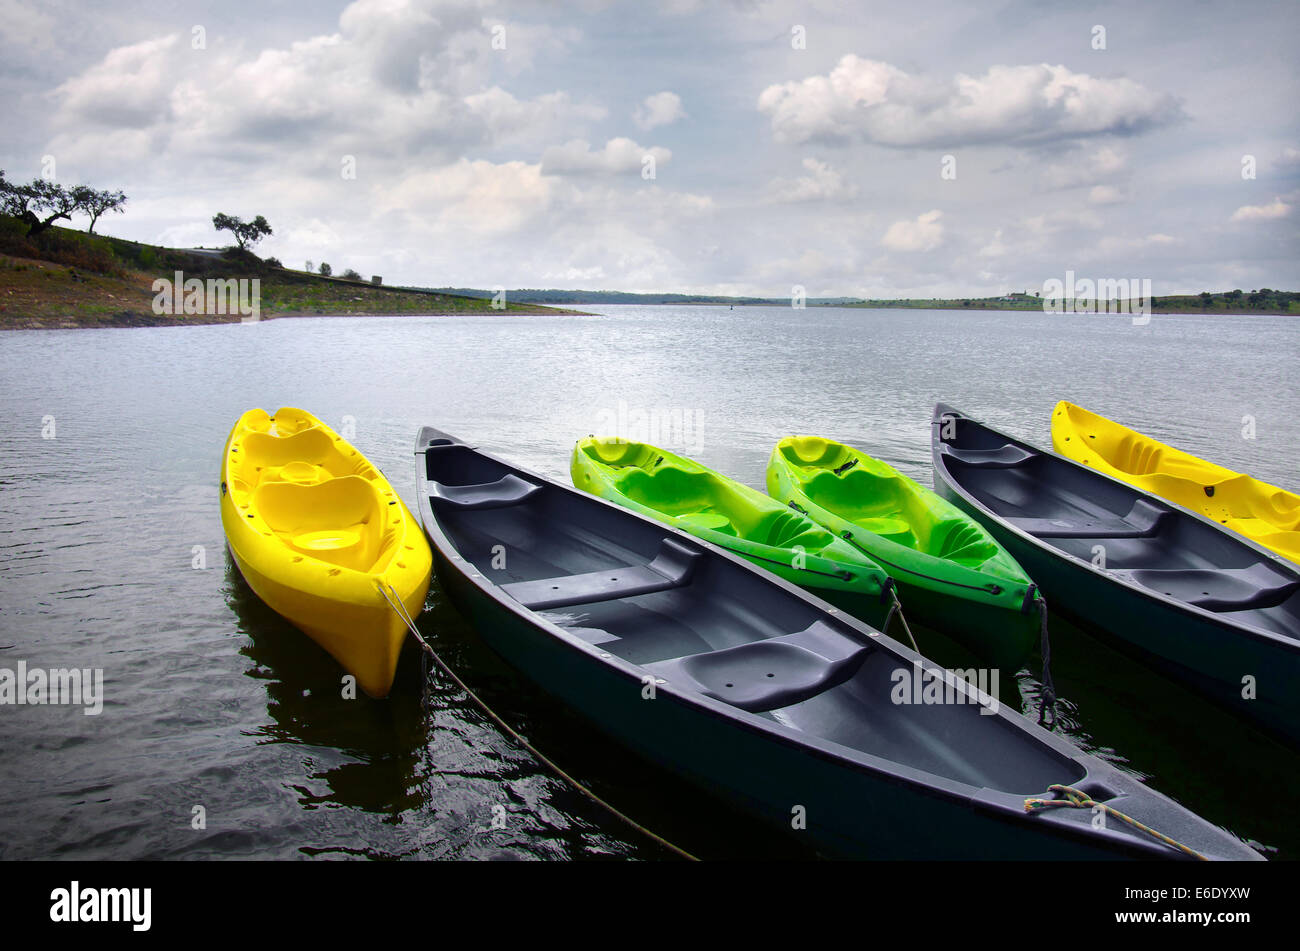 Green and yellow kayaks and canoes docked in the shore of a lake Stock Photo